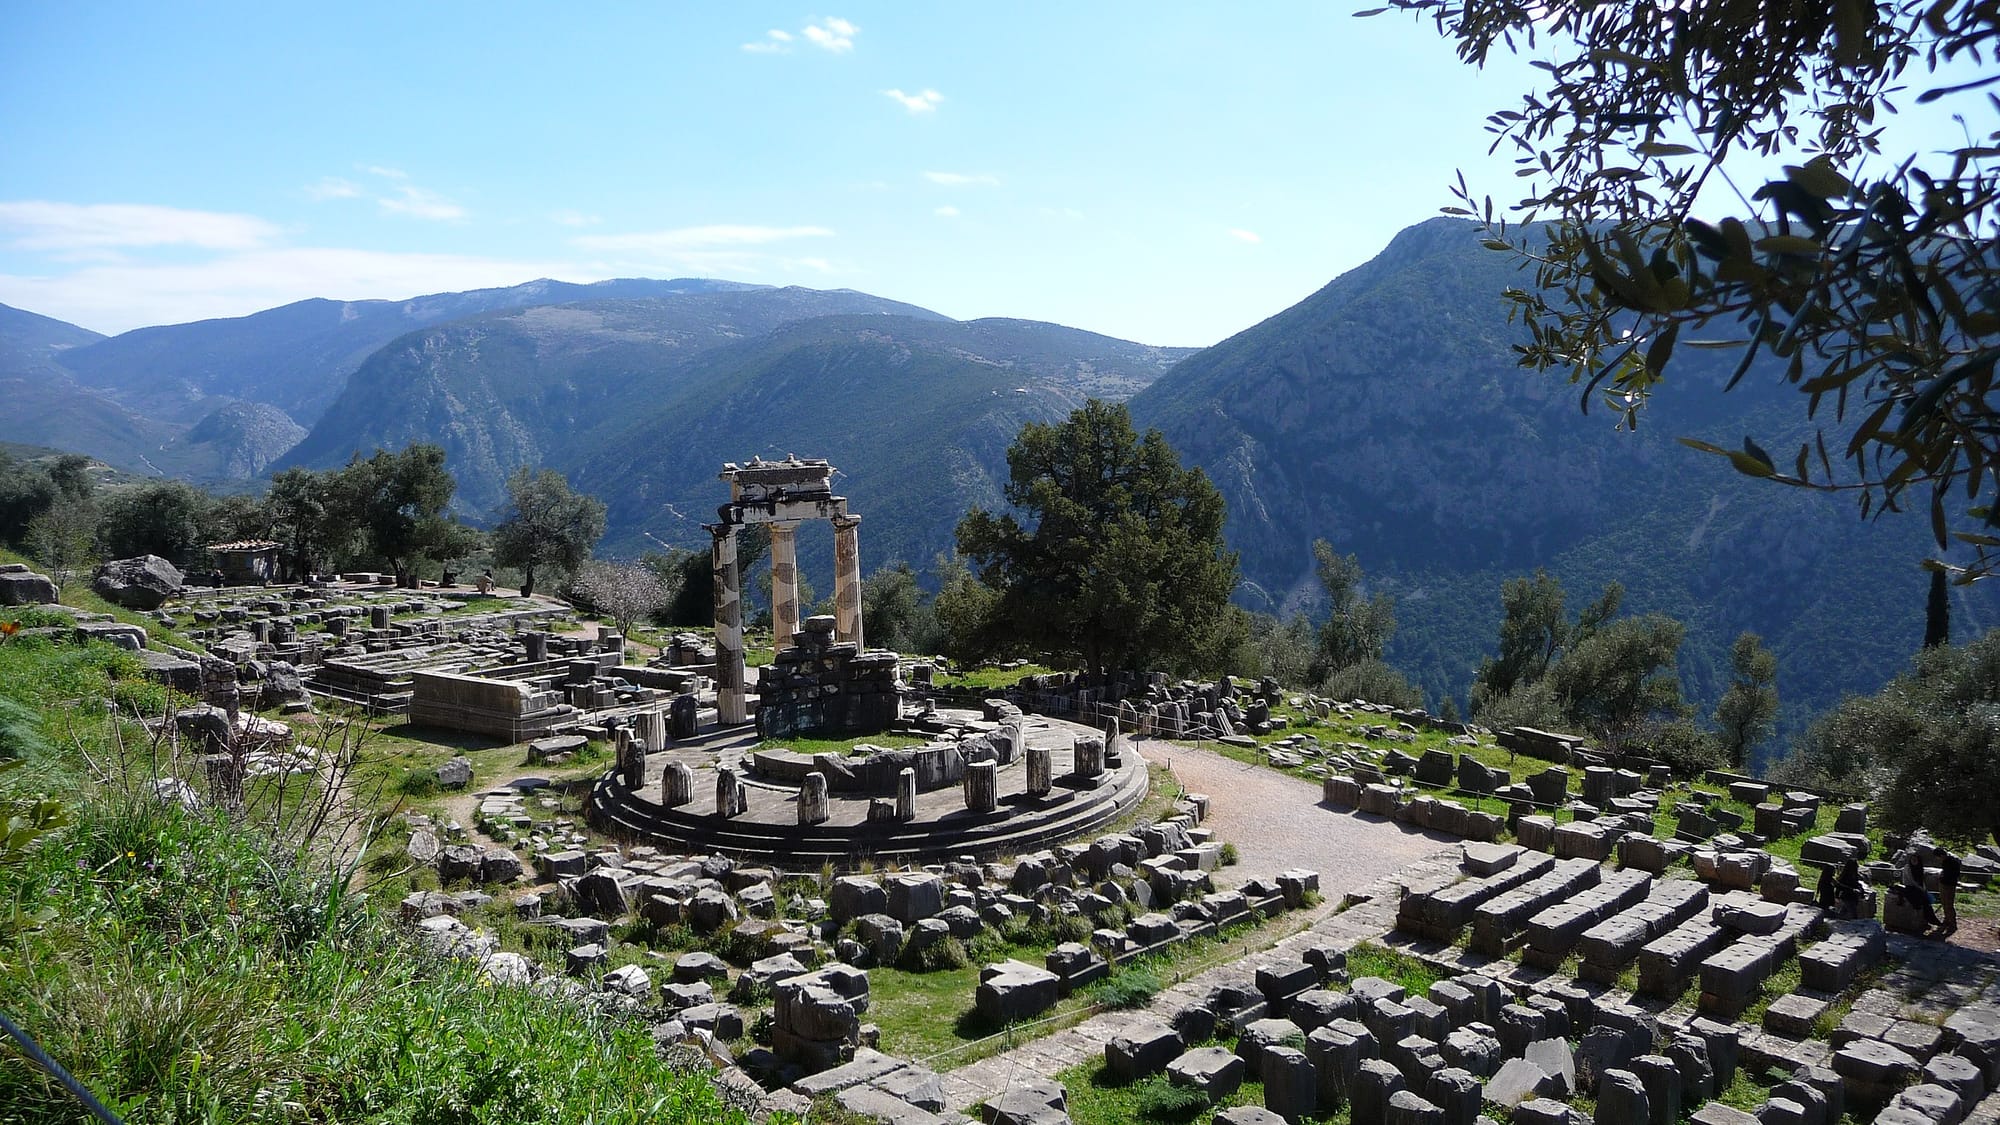 The Oracle at Delphi